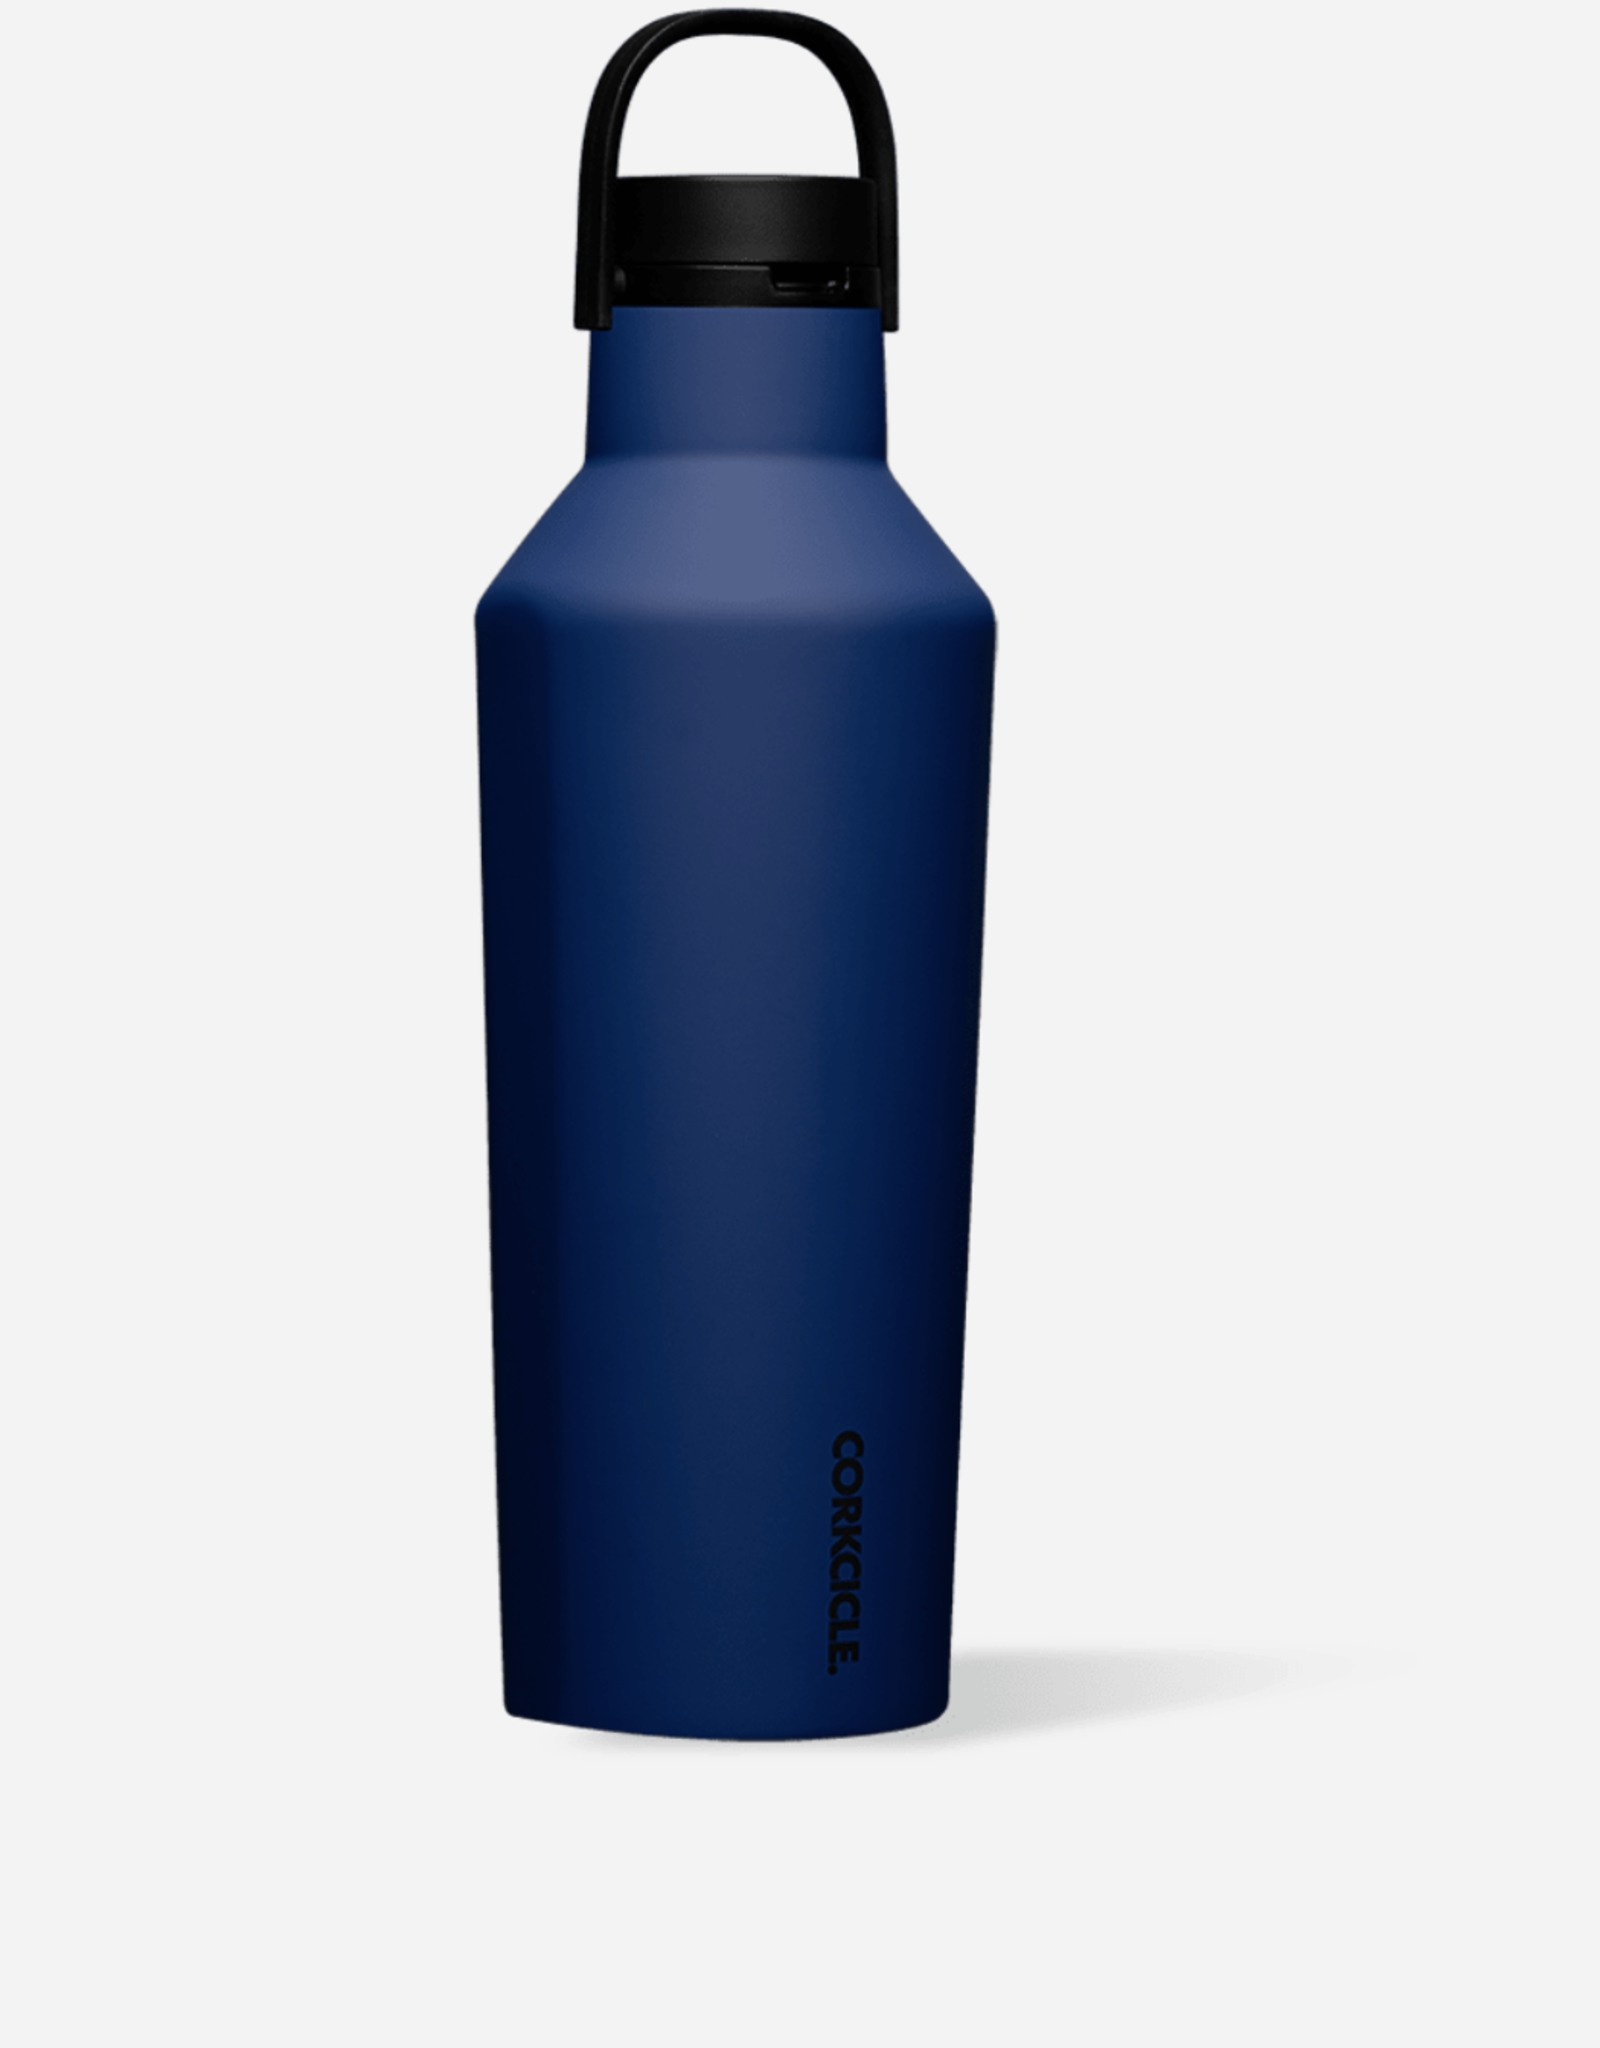 Corkcicle Corkcicle Midnight Navy Gloss Collection